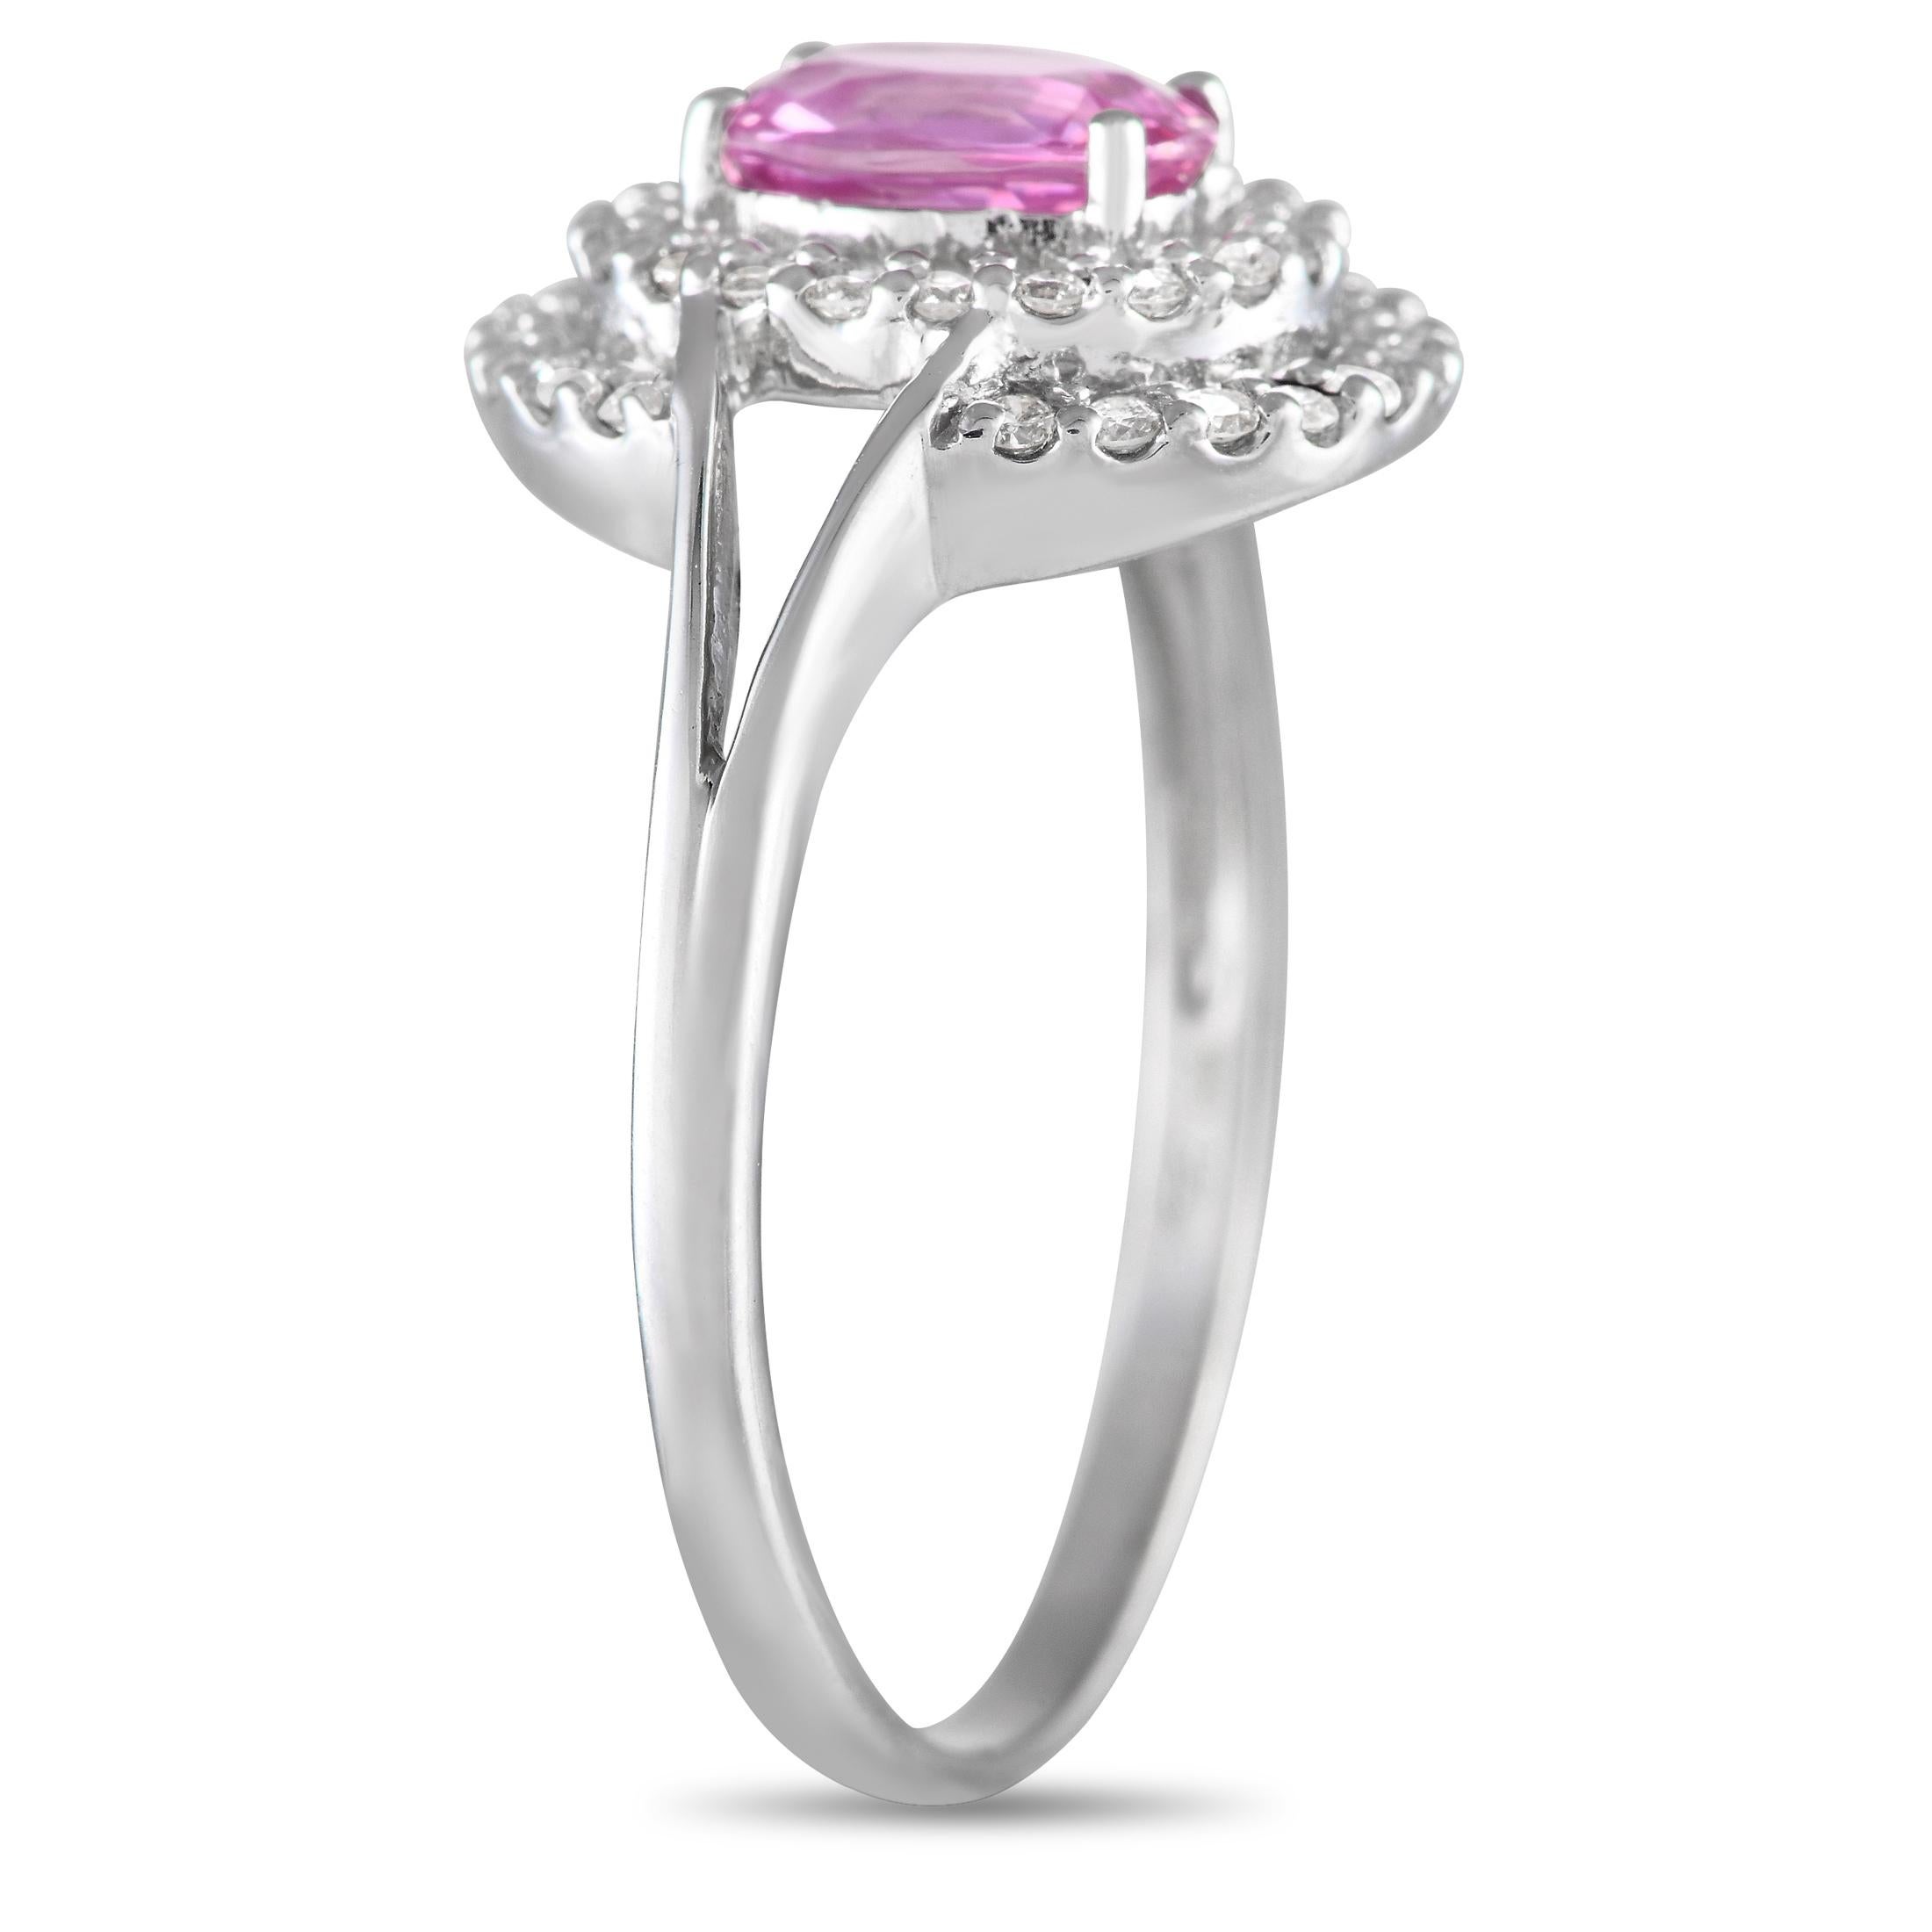 She'll love the bold but pared-back aesthetic of this ring. The slender white gold band features split shoulders that lead to a halo of round diamonds framing a captivating 1.23 ct pink sapphire. For an abundance of sparkle, a pair of diamond arcs